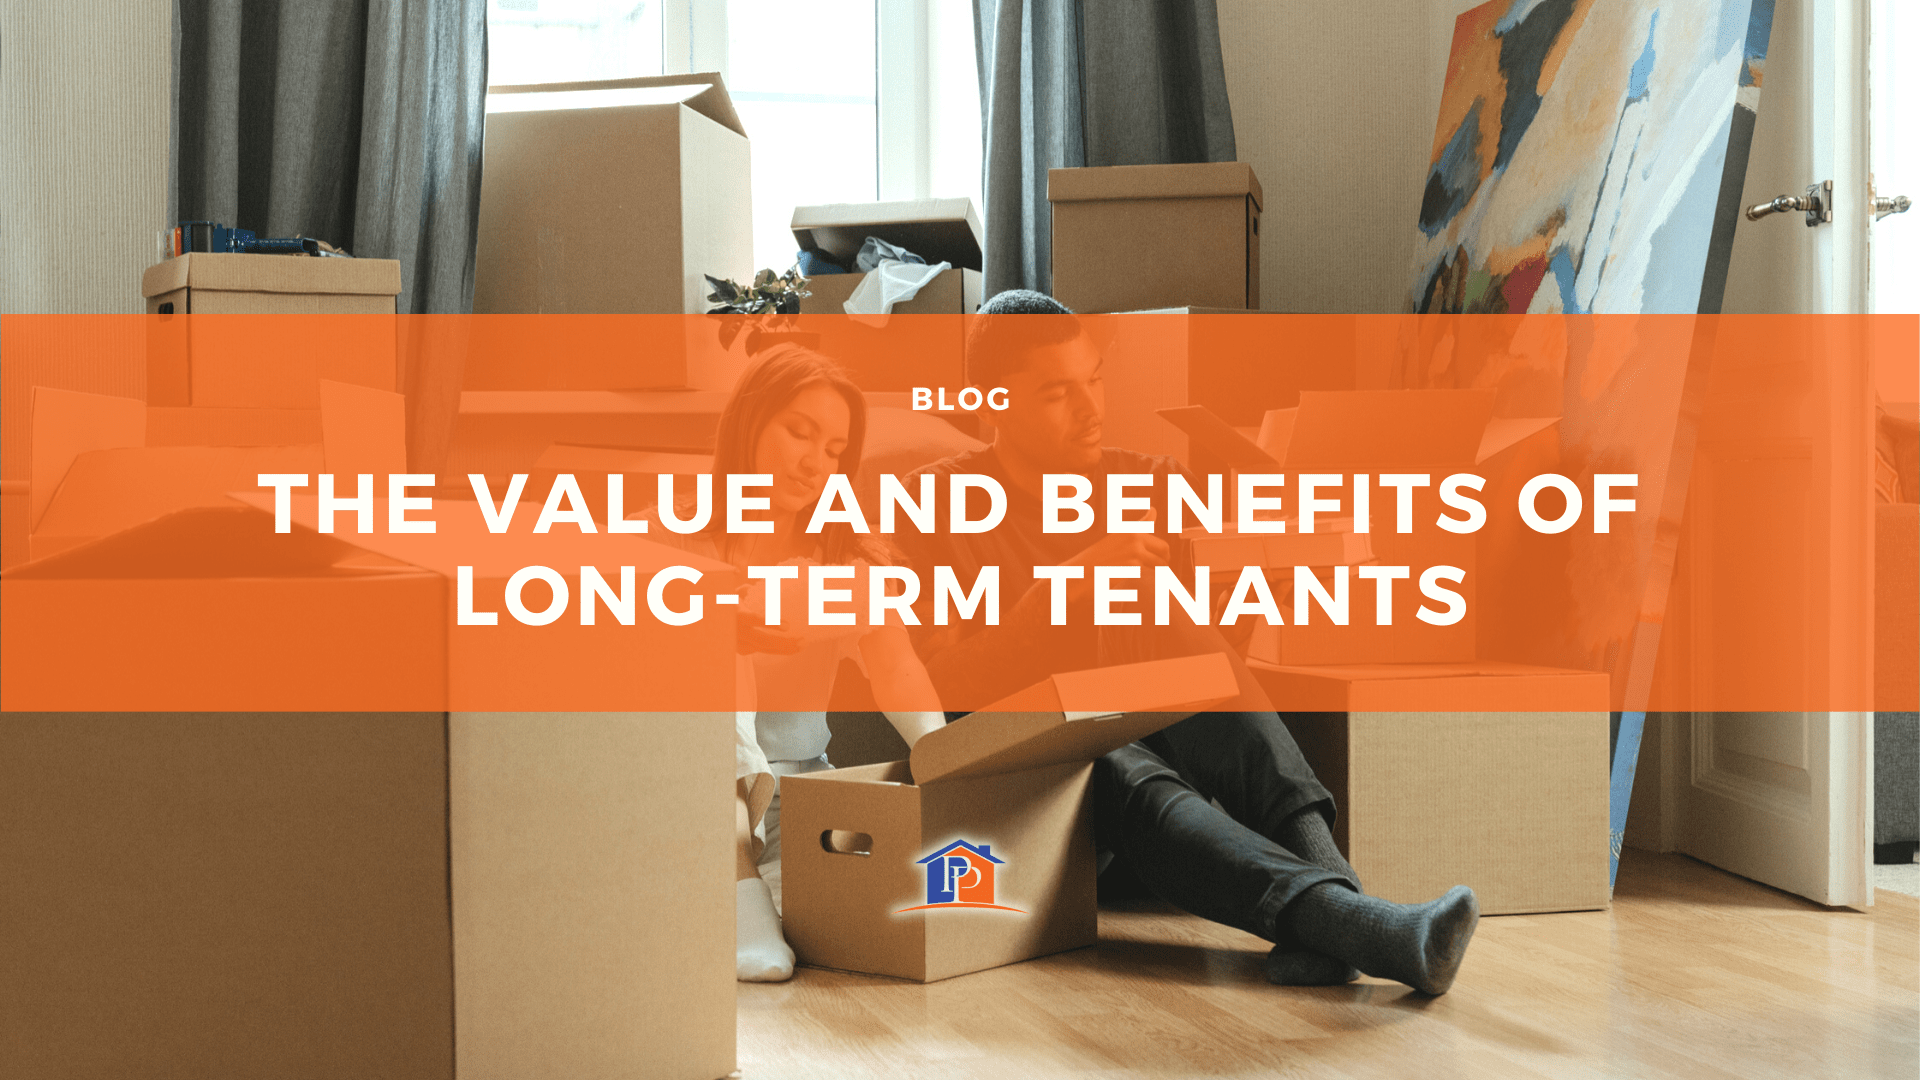 The Value and Benefits of Long-Term Tenants